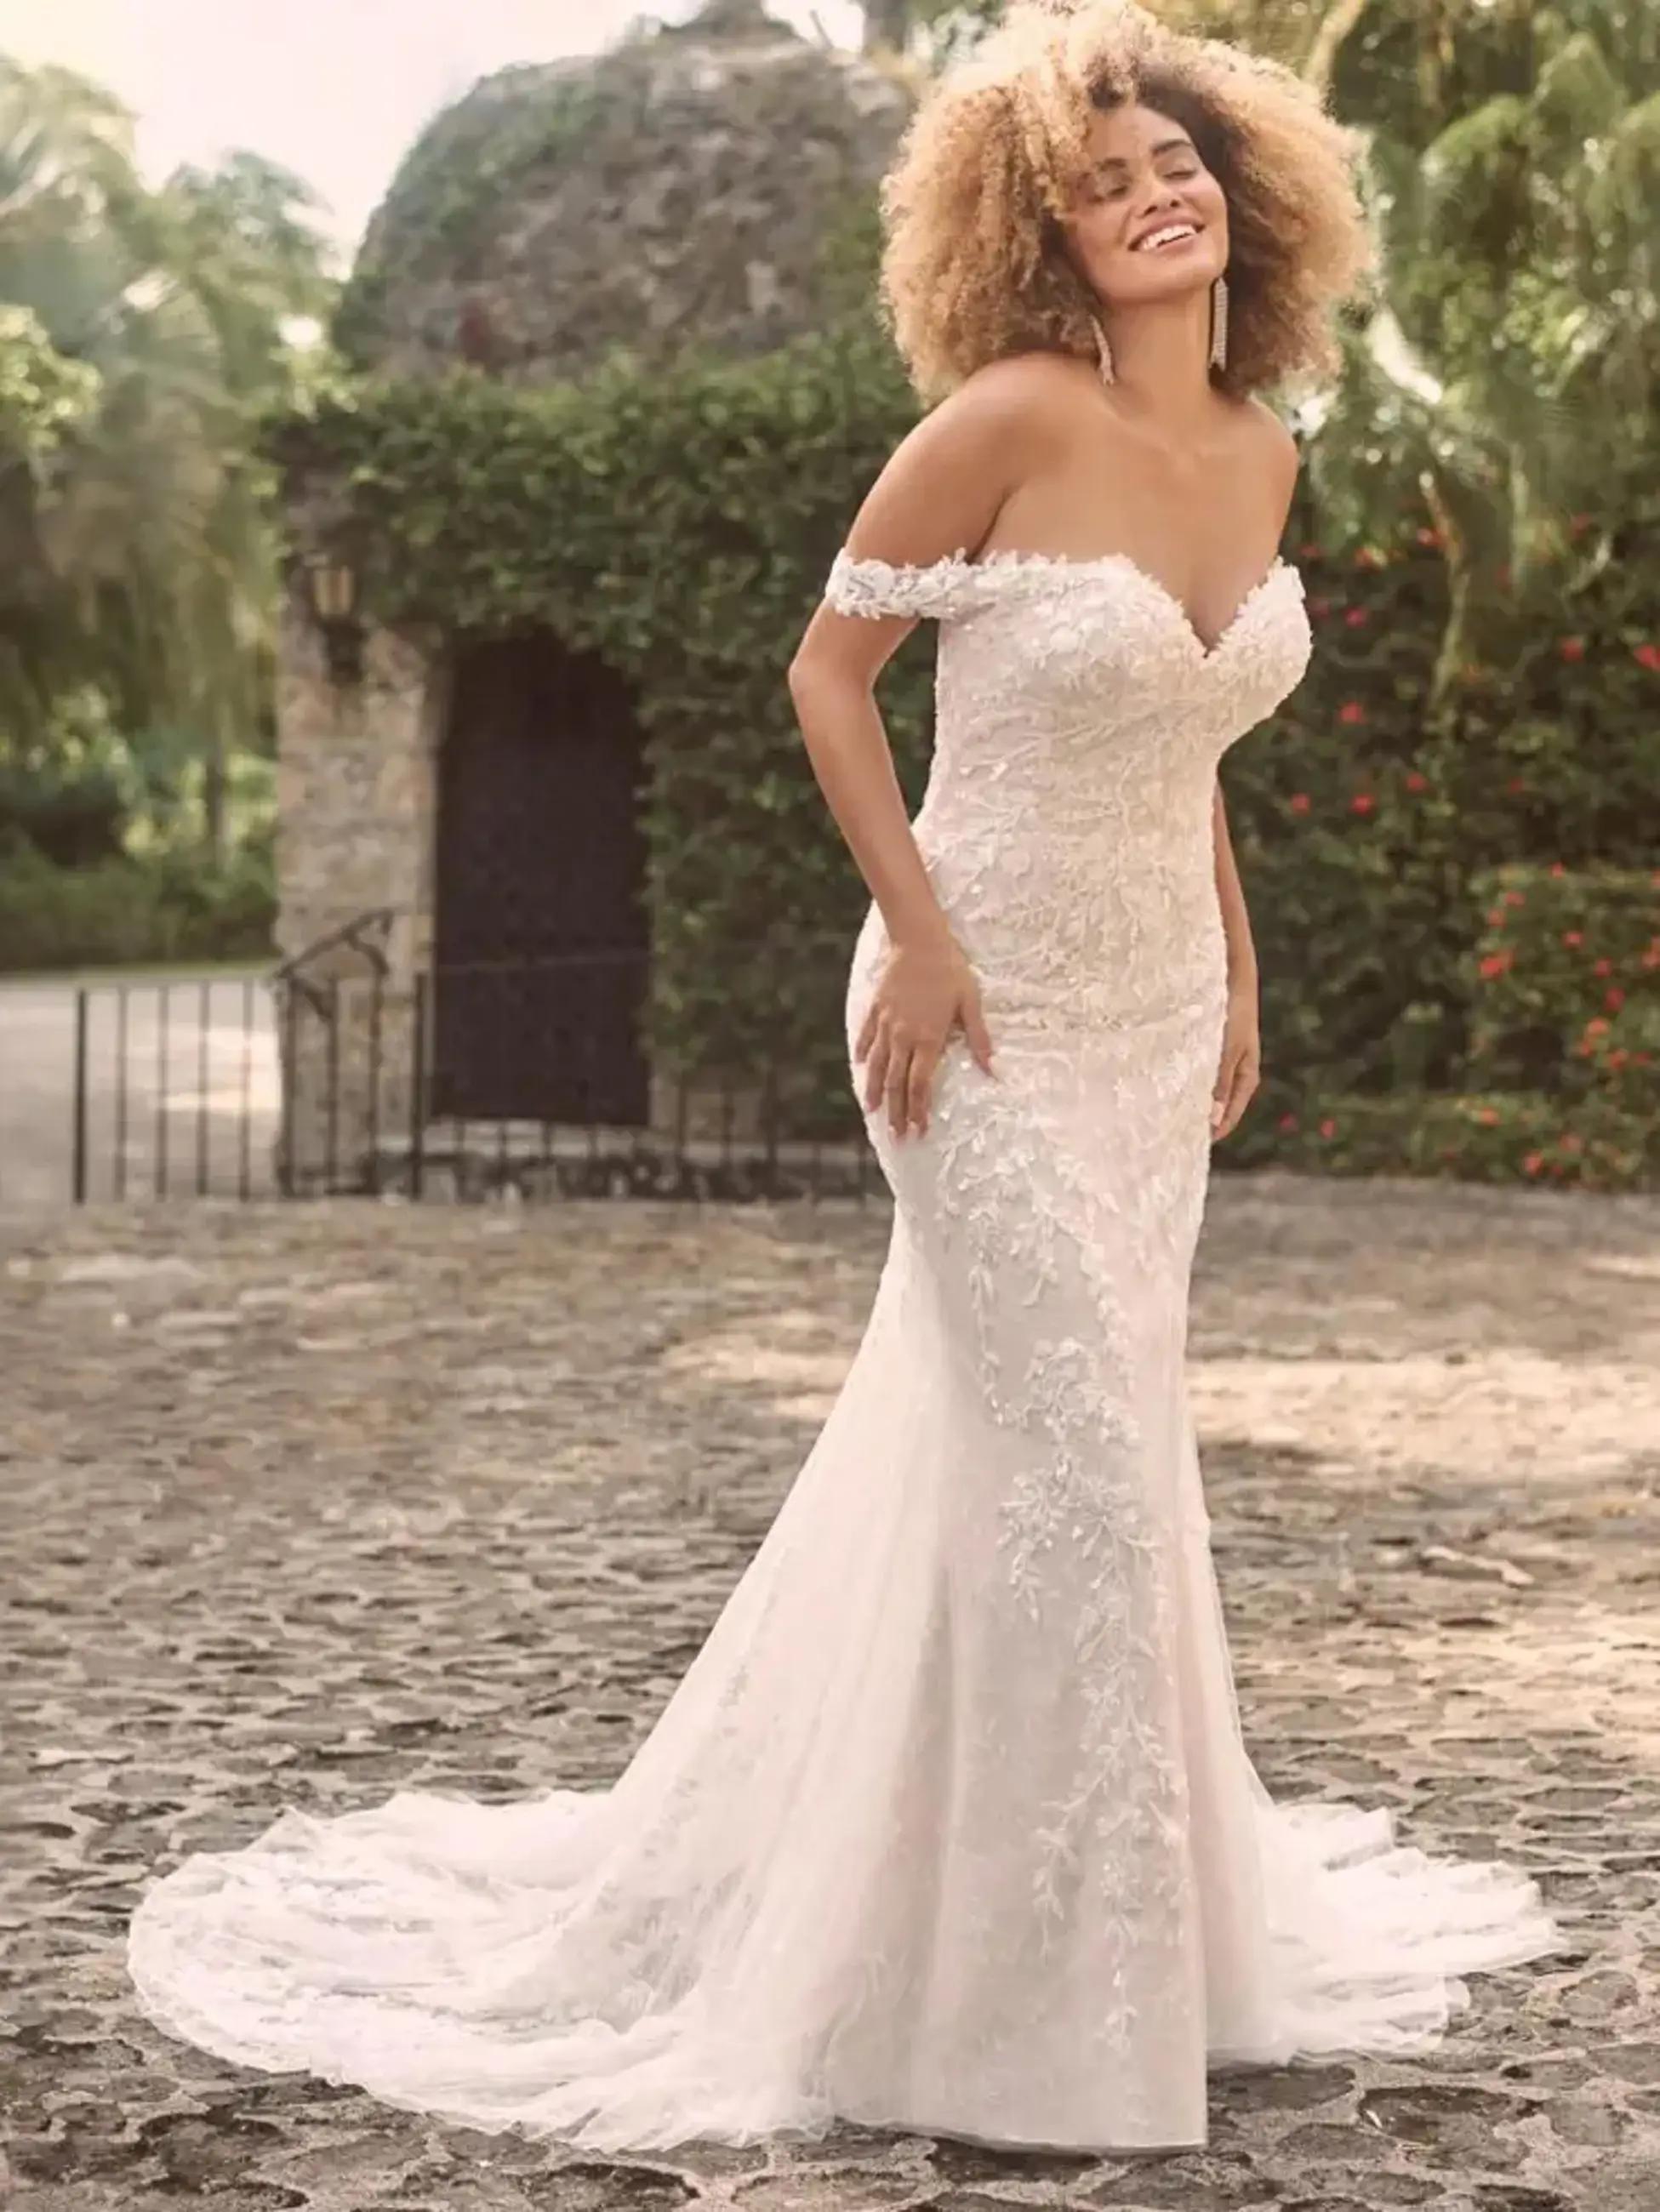 Model wearing a Maggie Sottero gown